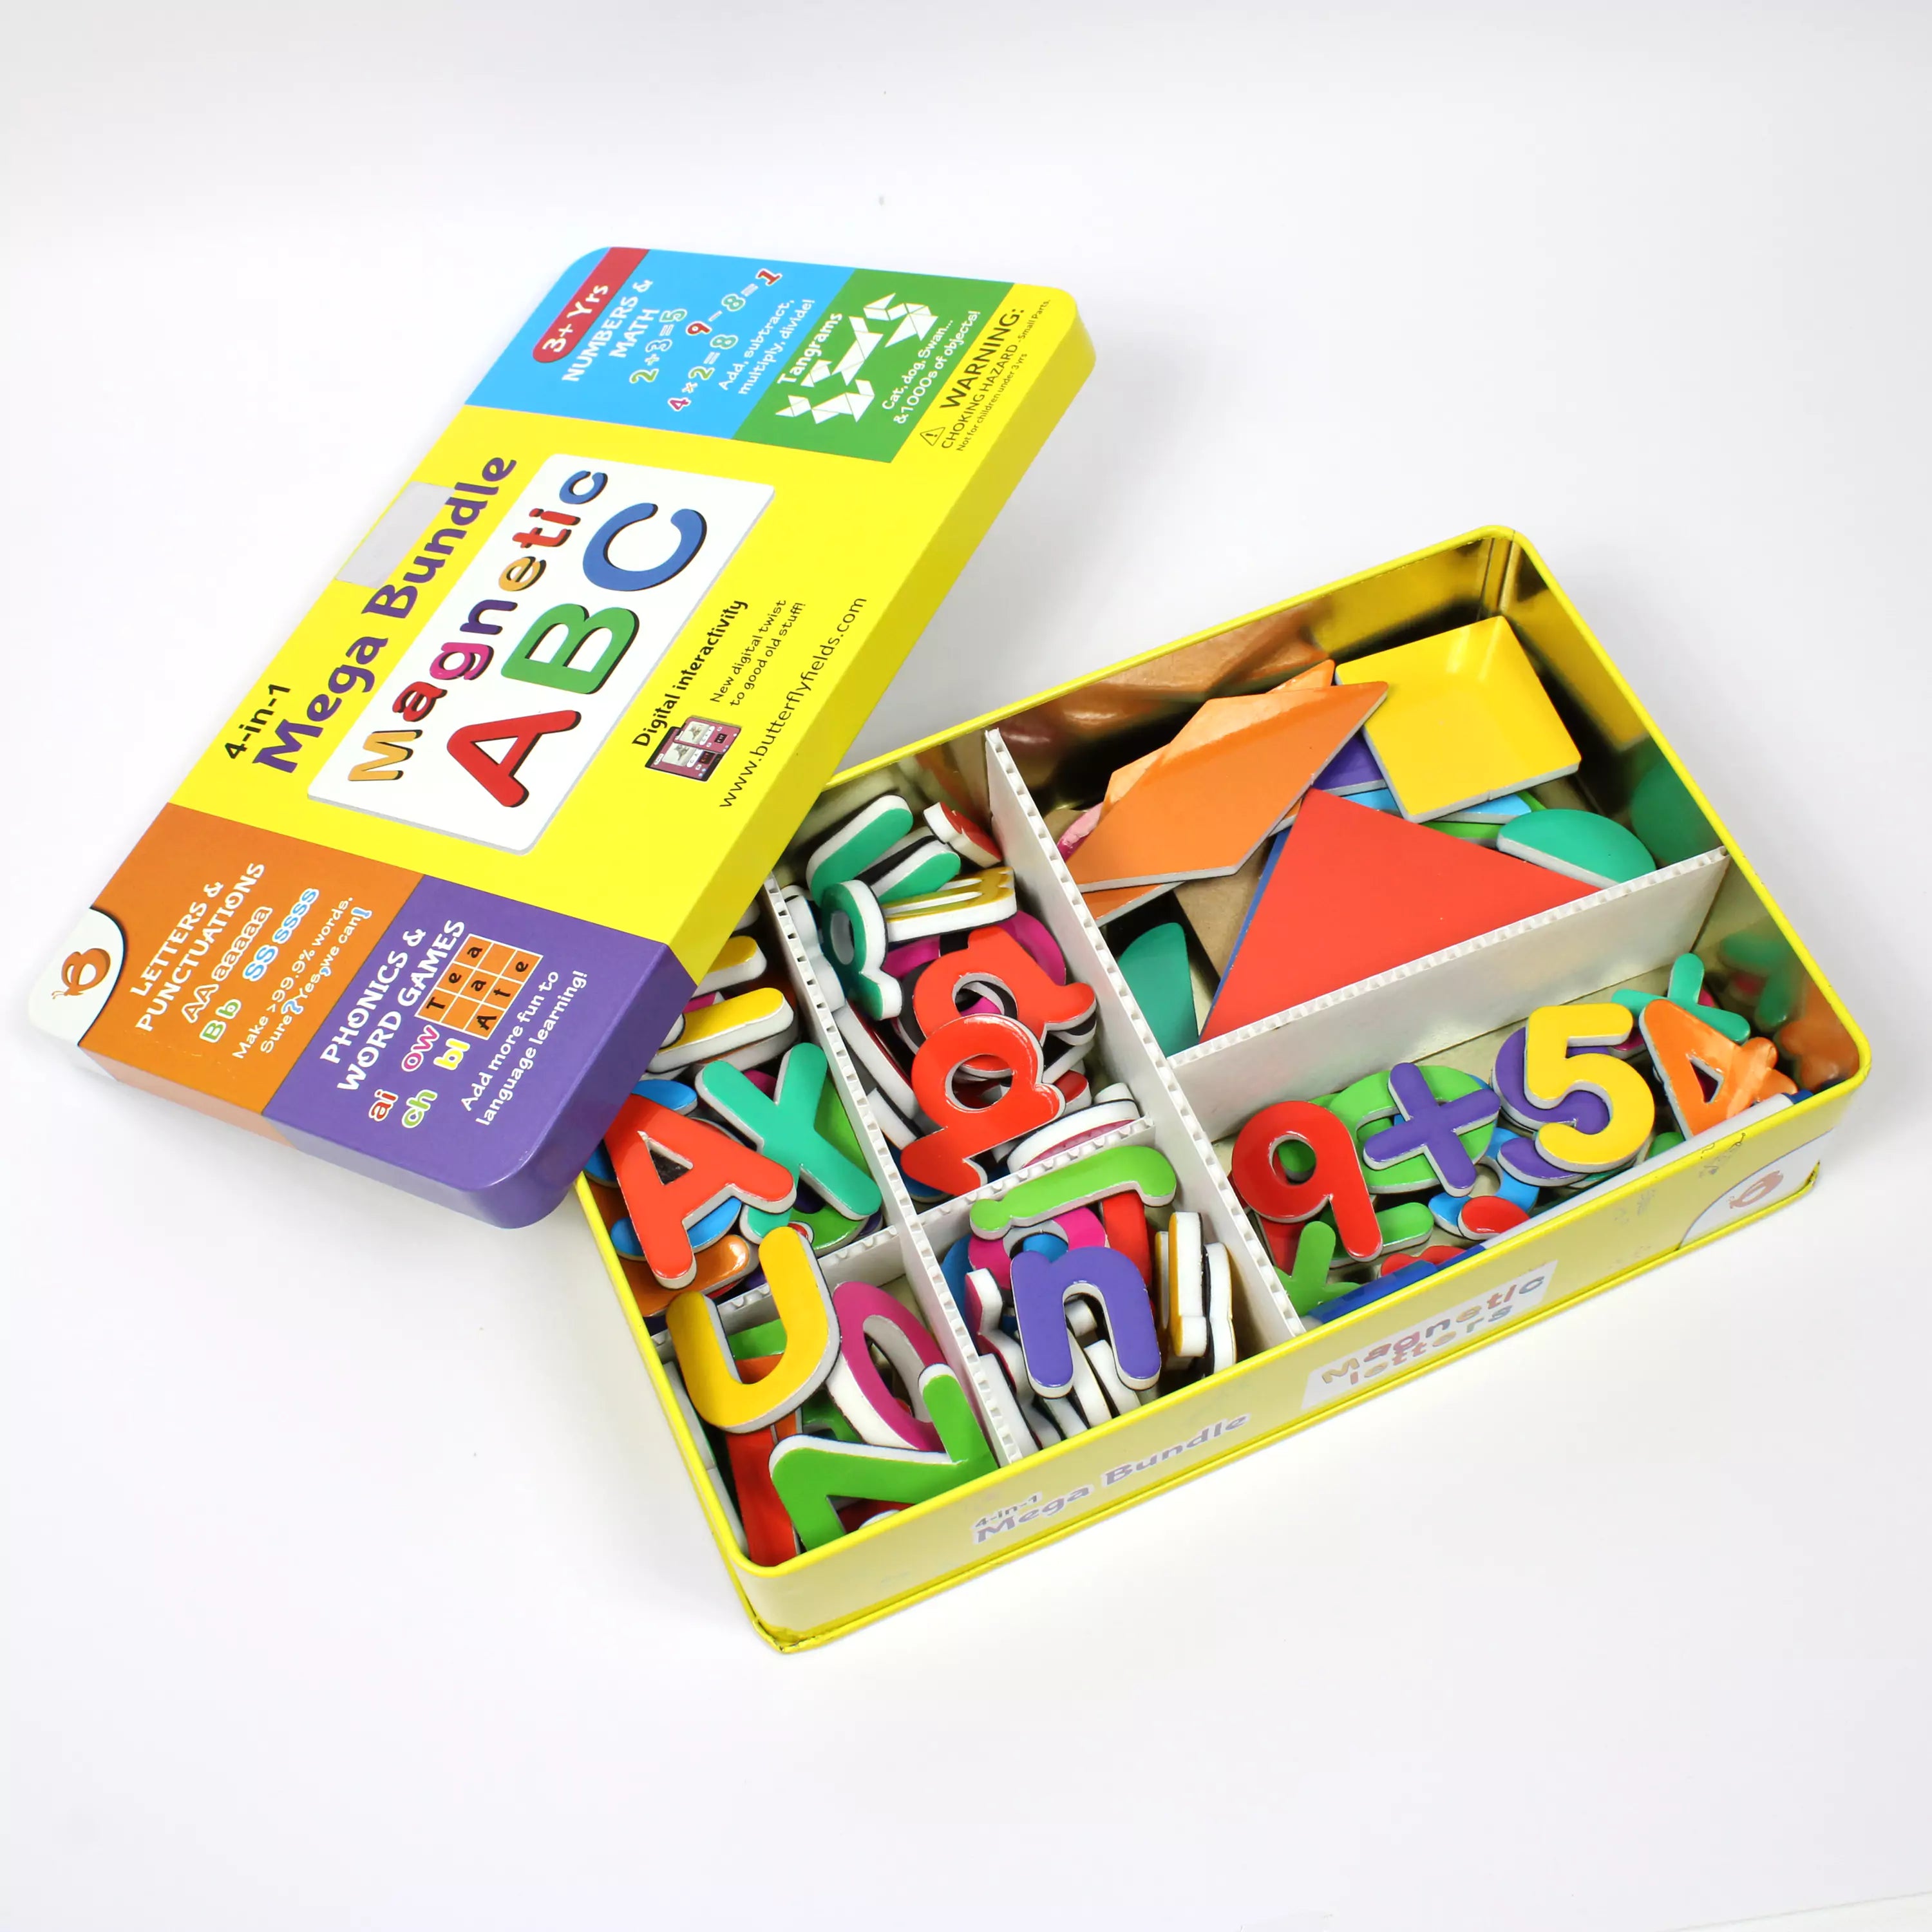 90pc Magnetic Letters Gift Box | 3-5 yrs